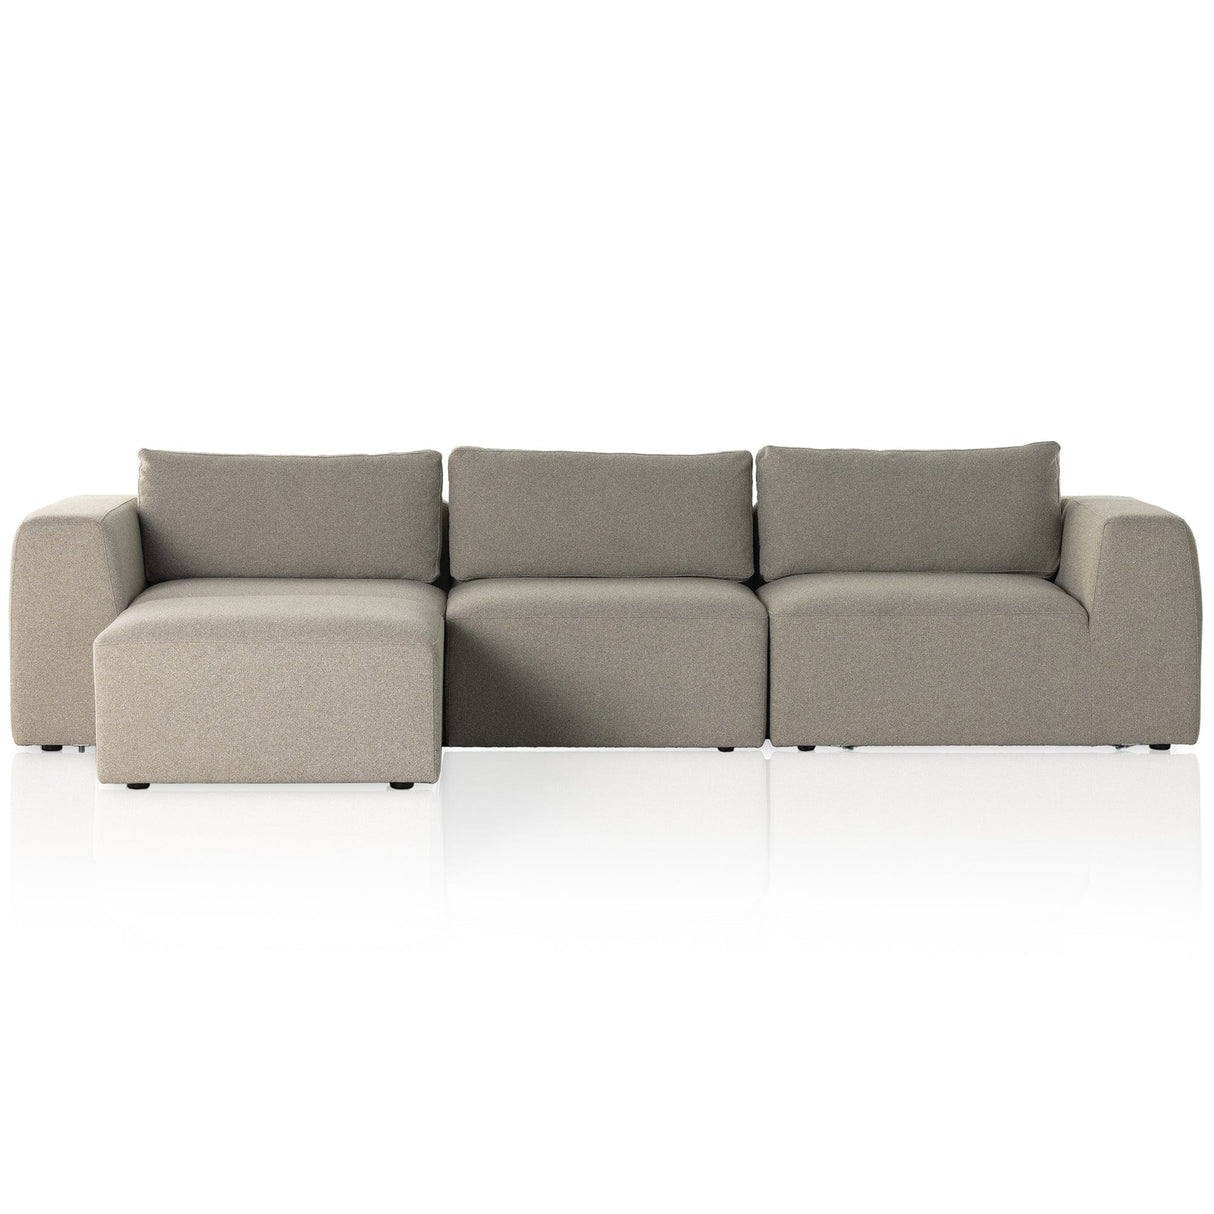 Four Hands Brylee Sofa Furniture four-hands-236301-001 801542067458